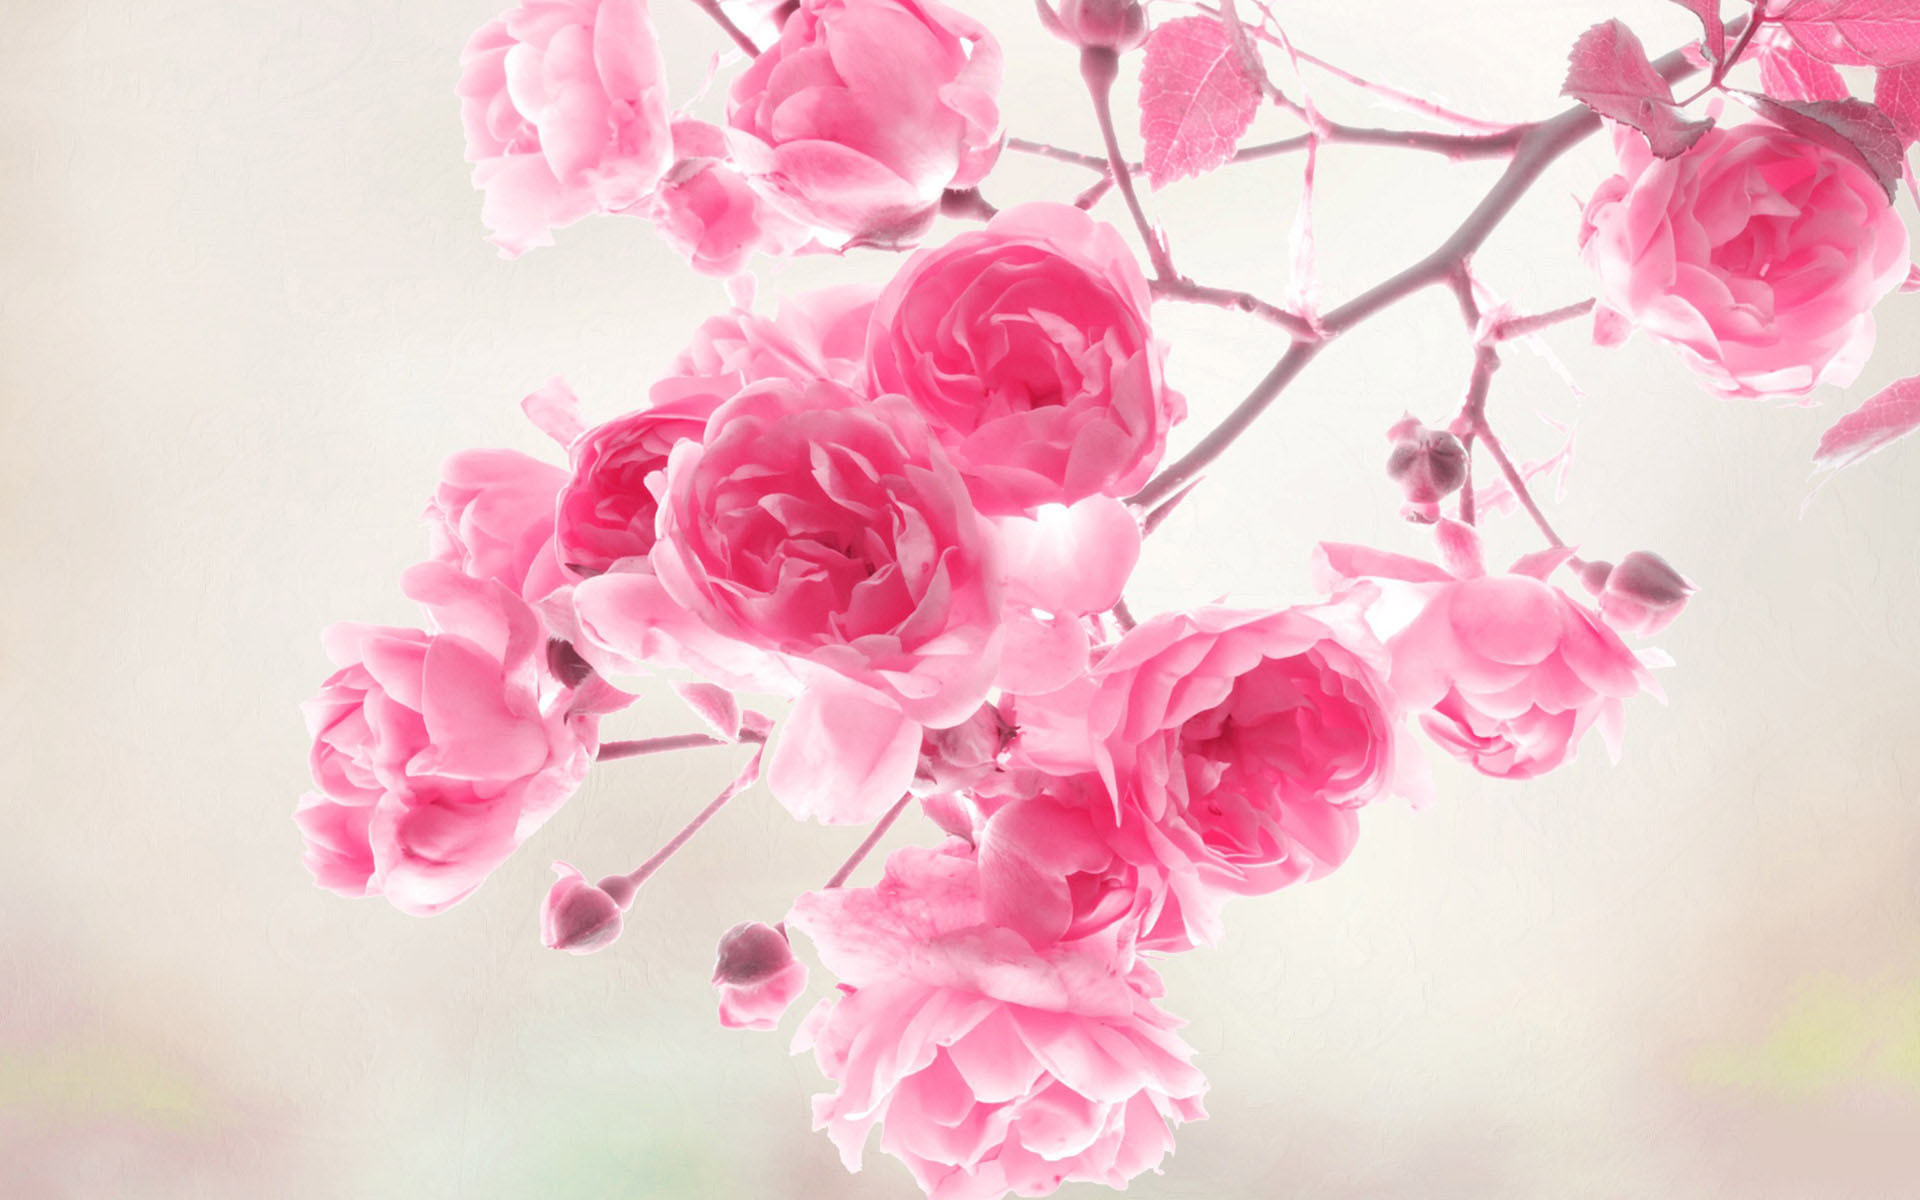 1920x1200 HD Wallpaper and background photos of Pretty Pink Roses Wallpaper for fans  of Pink (Color) images.